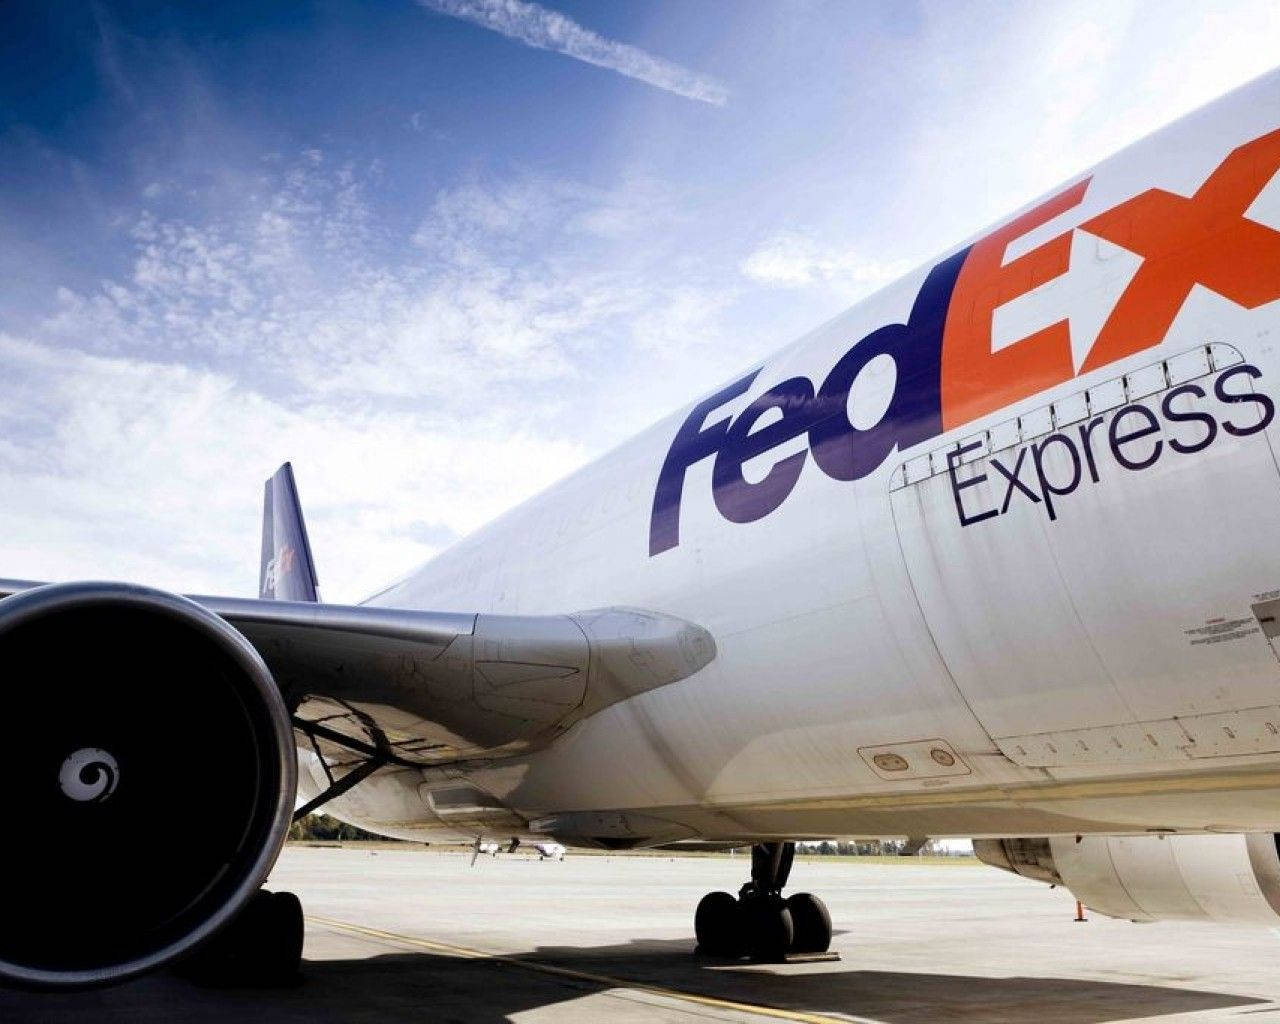 Fedex Express Airplane Side View Background